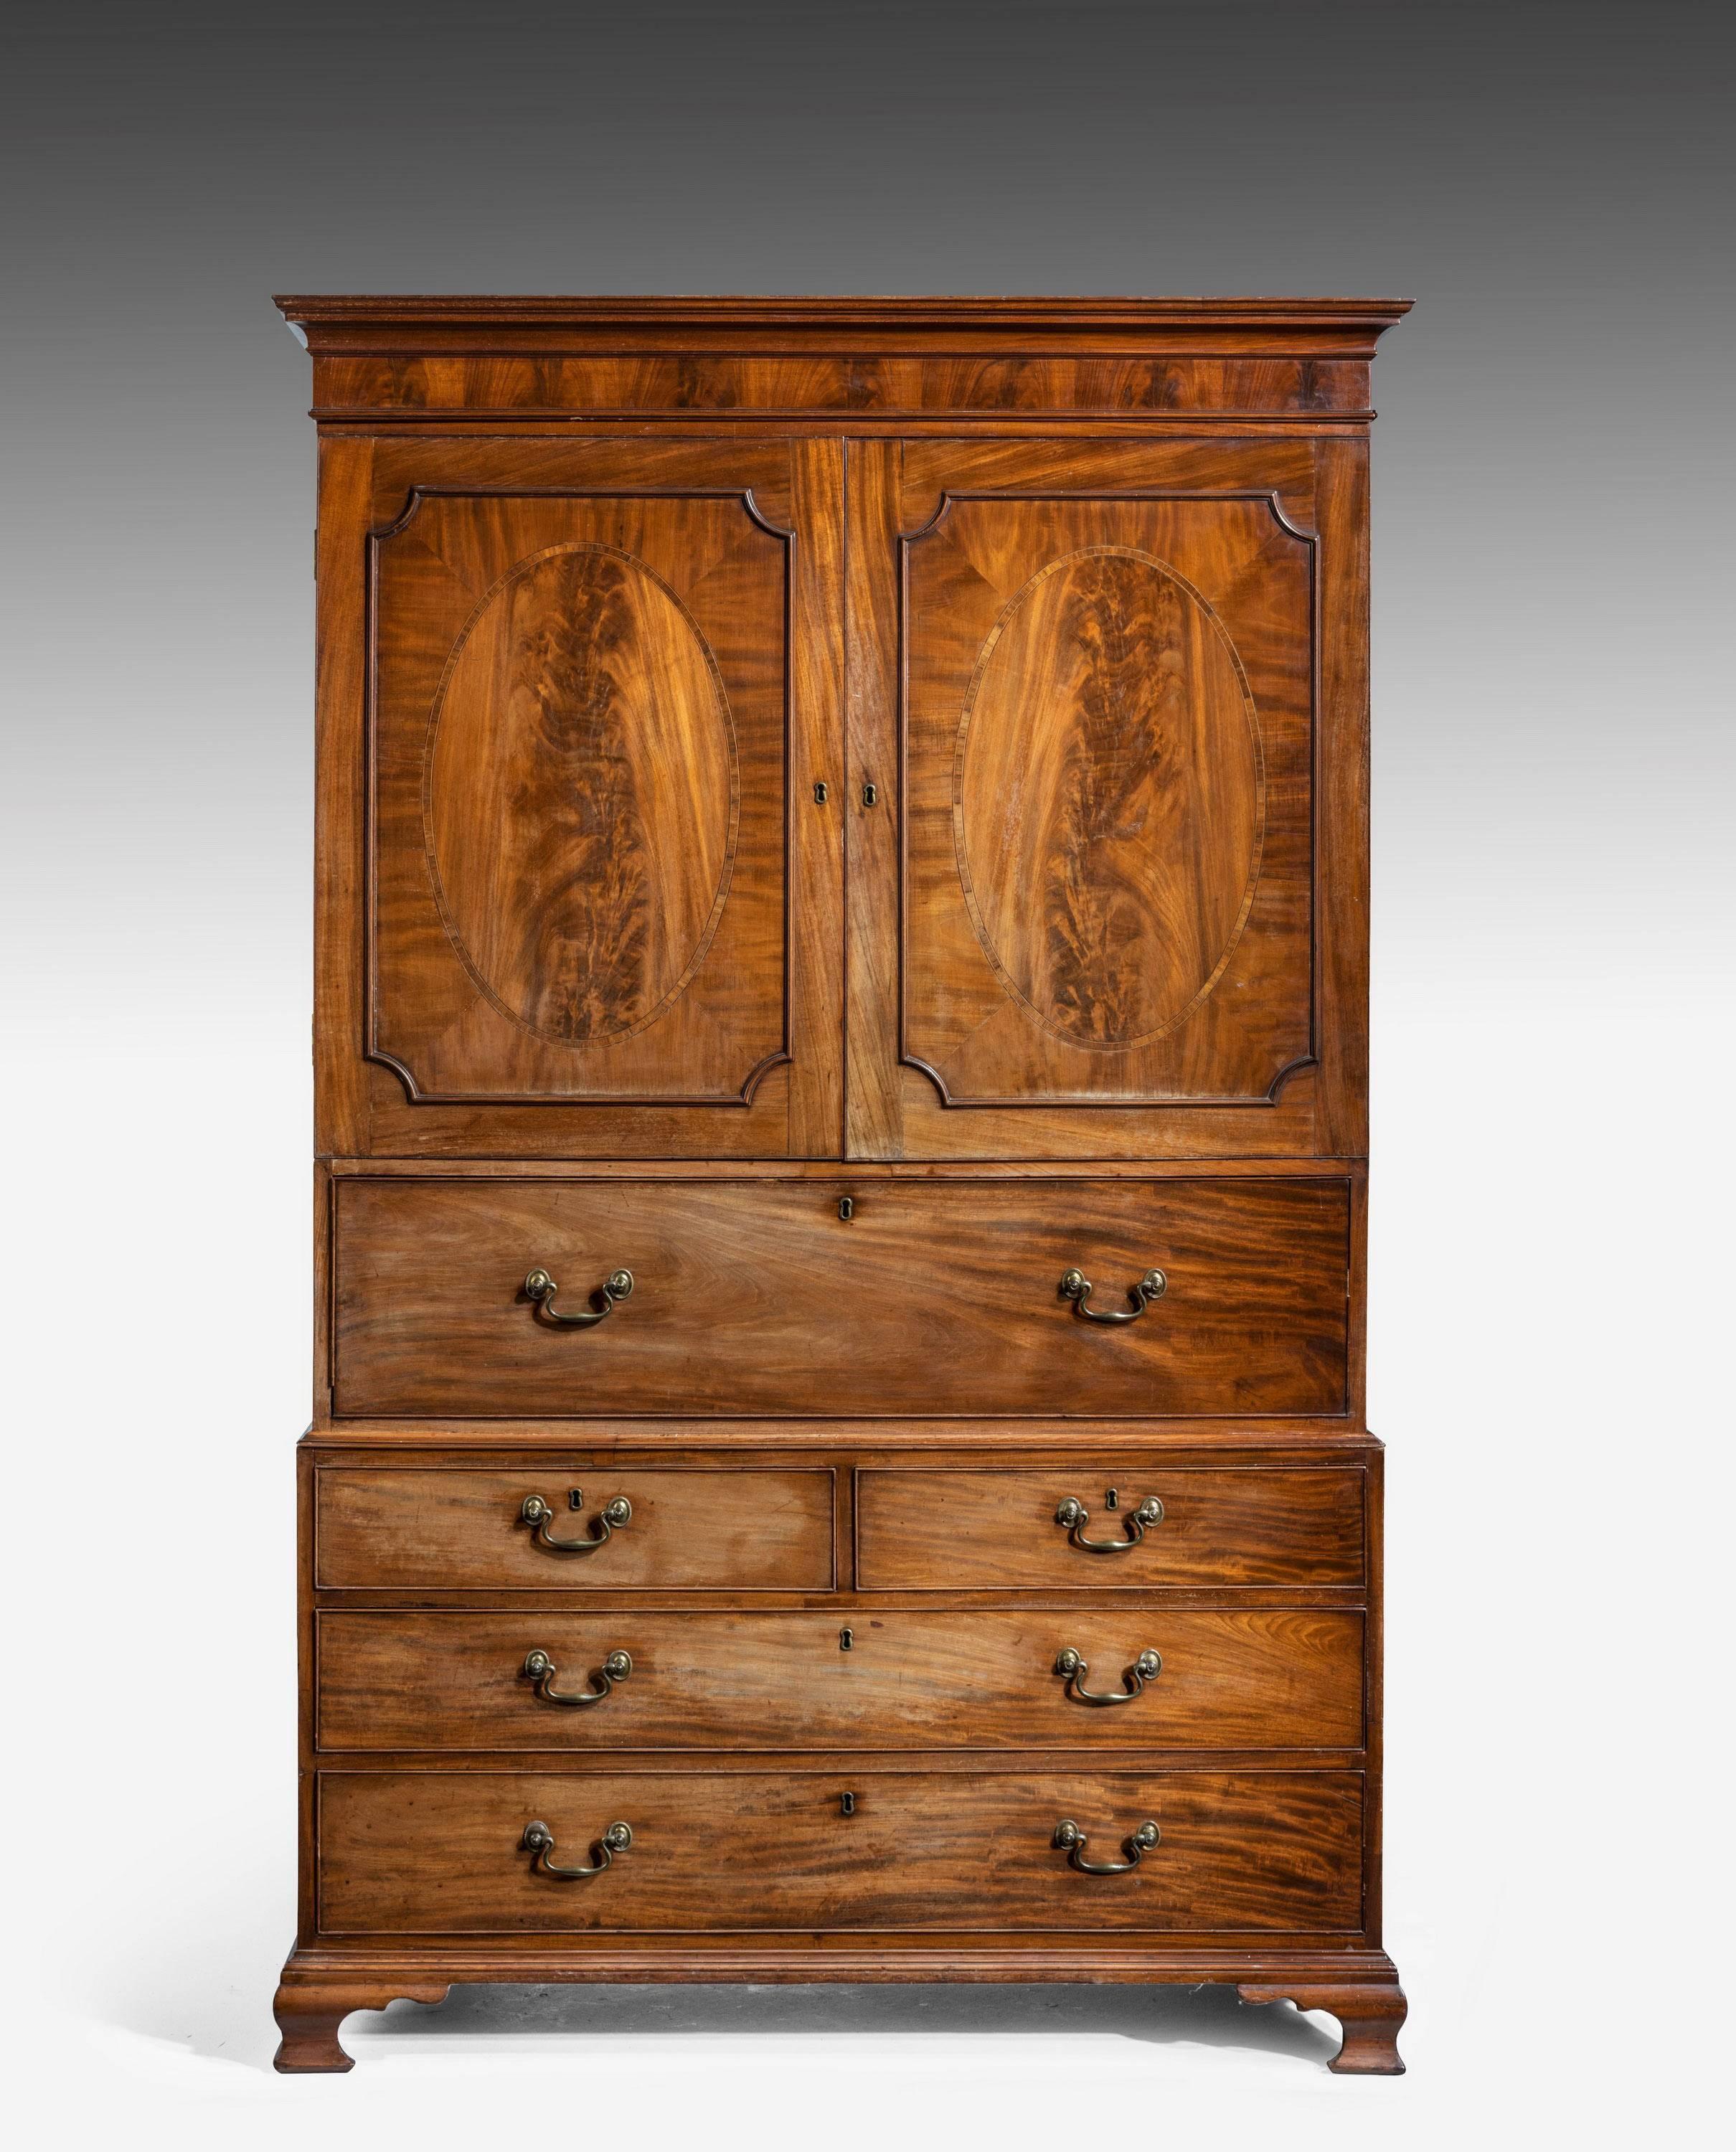 A fine quality George III period mahogany secretaire clothes press. A moulded cornice over a pair of highly figured panelled doors with oval centre sections. The fore front revealing a secretaire with an arrangement of small drawers and pigeon